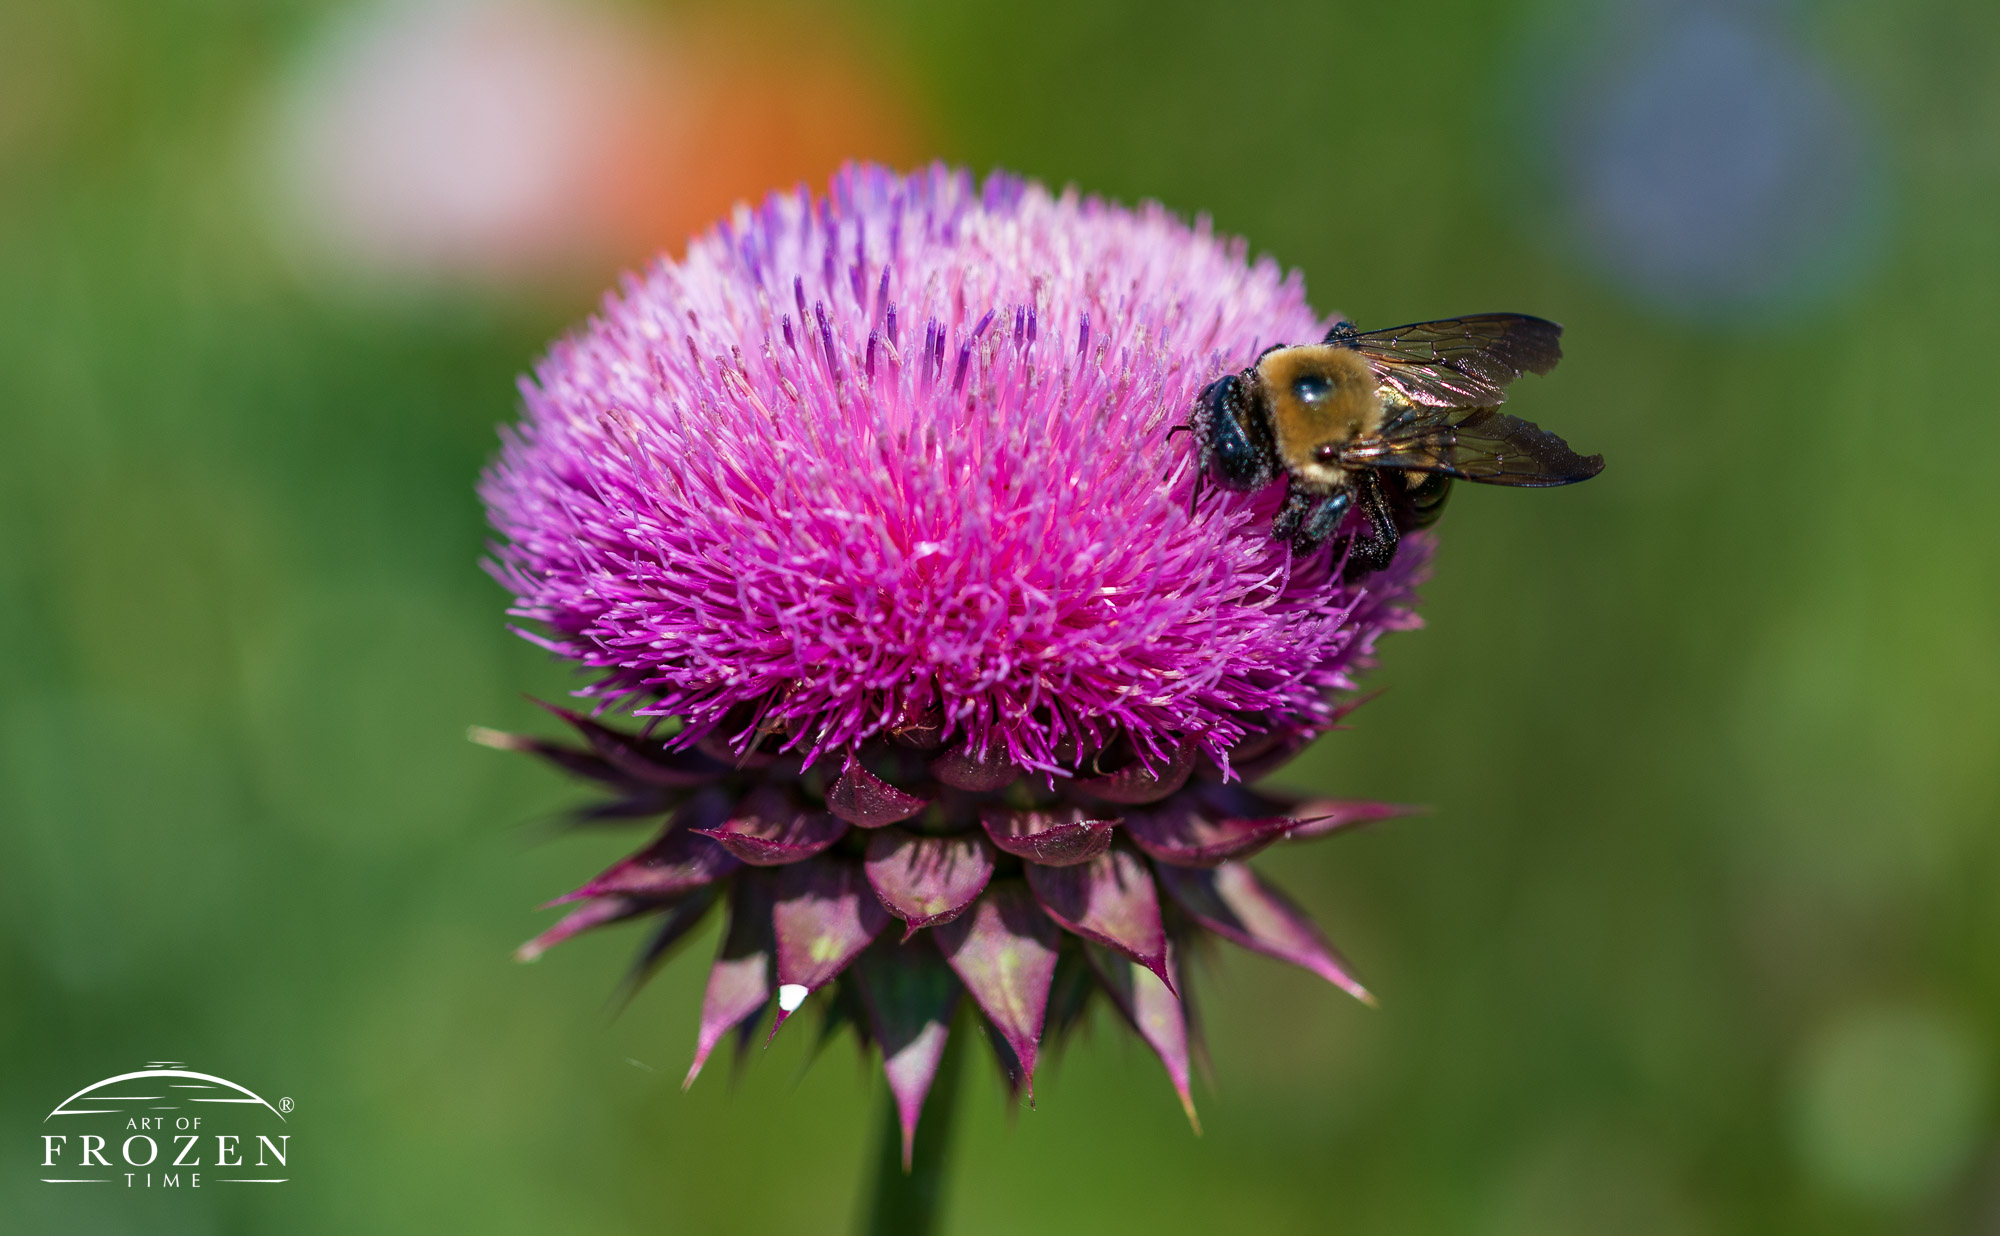 A musk thistle with its distinctive purple flower and large bracts under the flower which attracted this bee